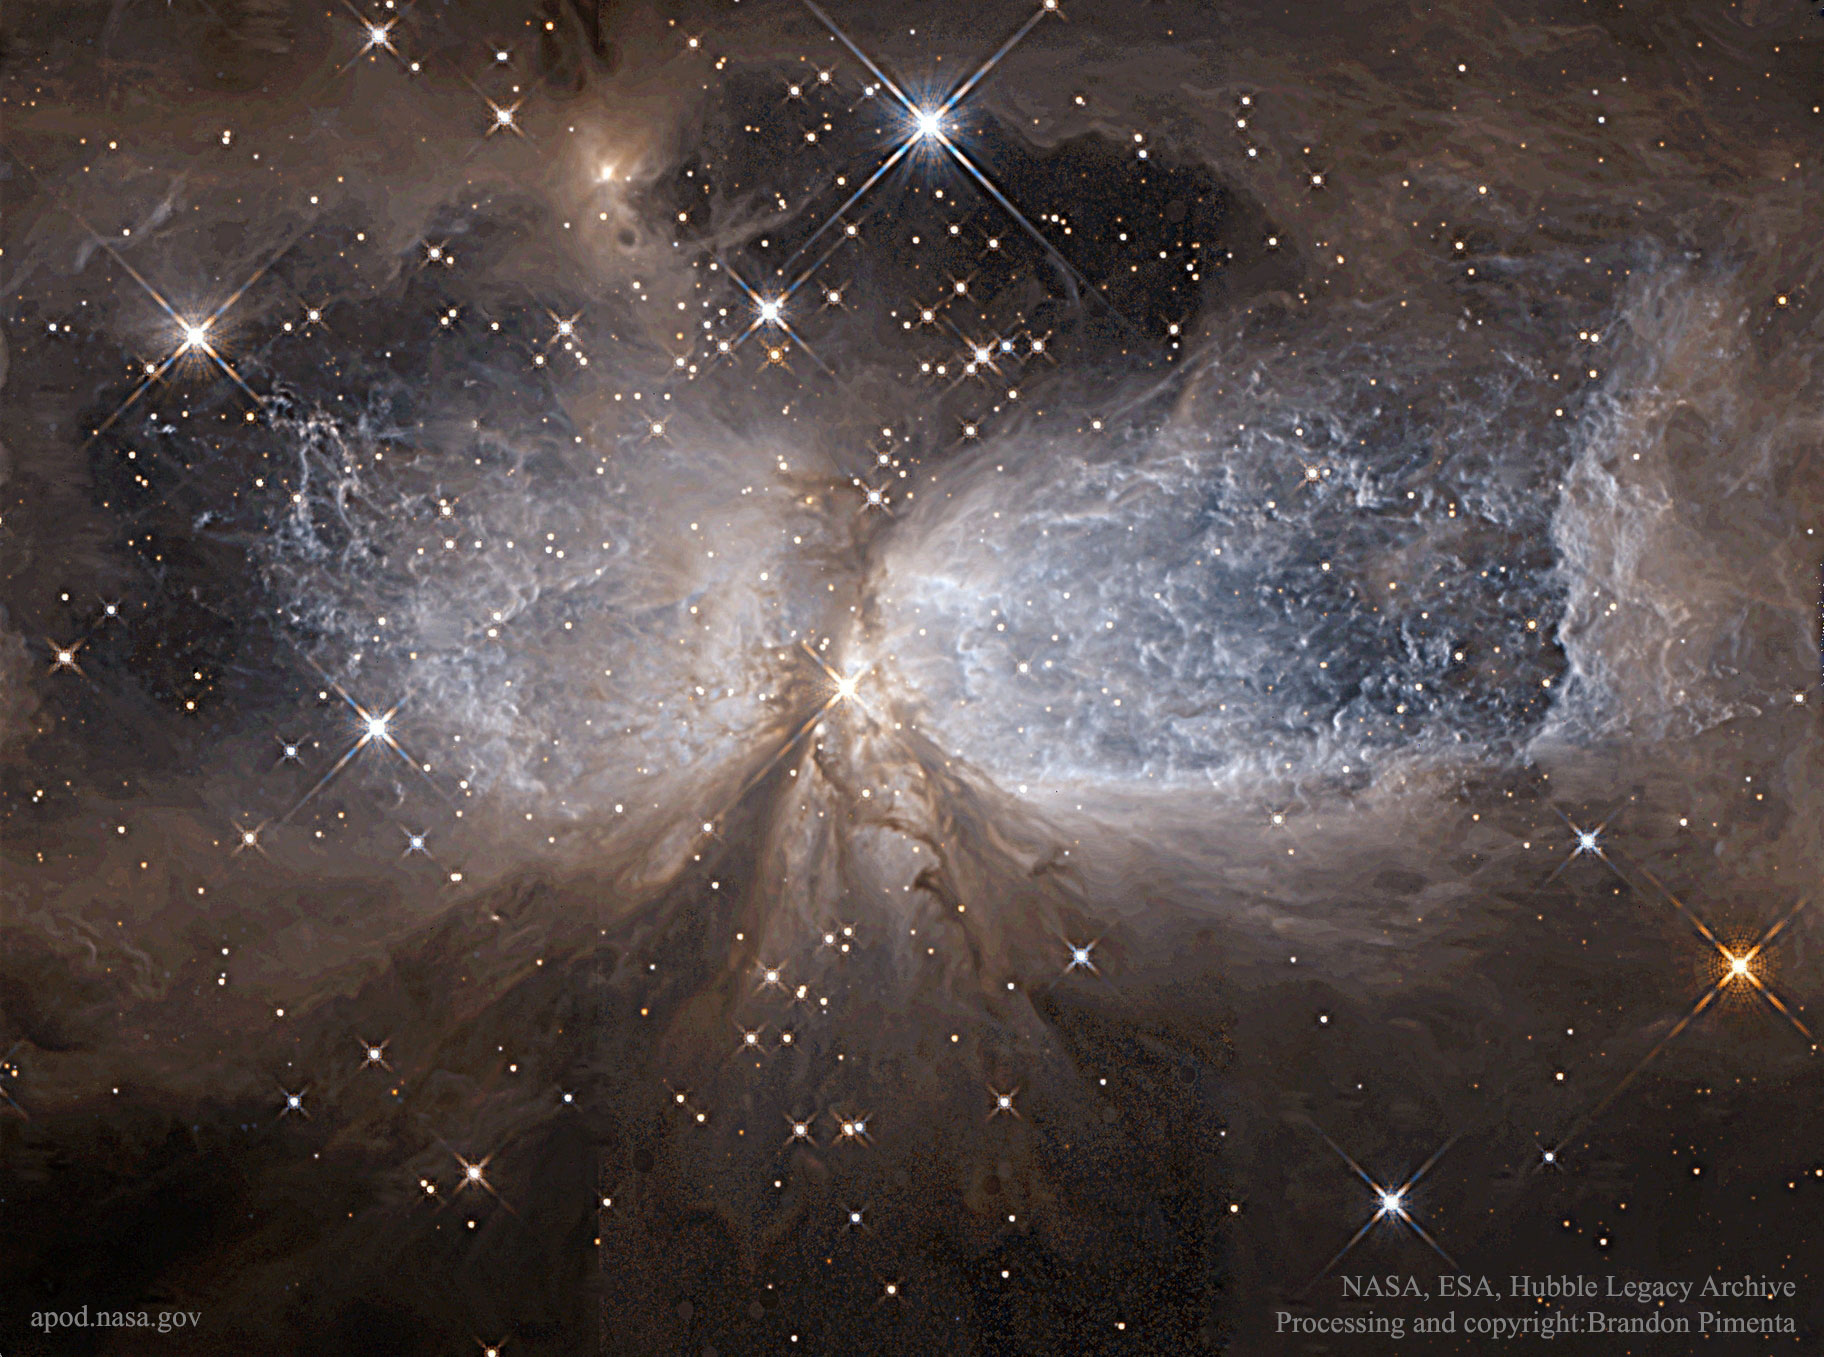 apod nasa picture of the day